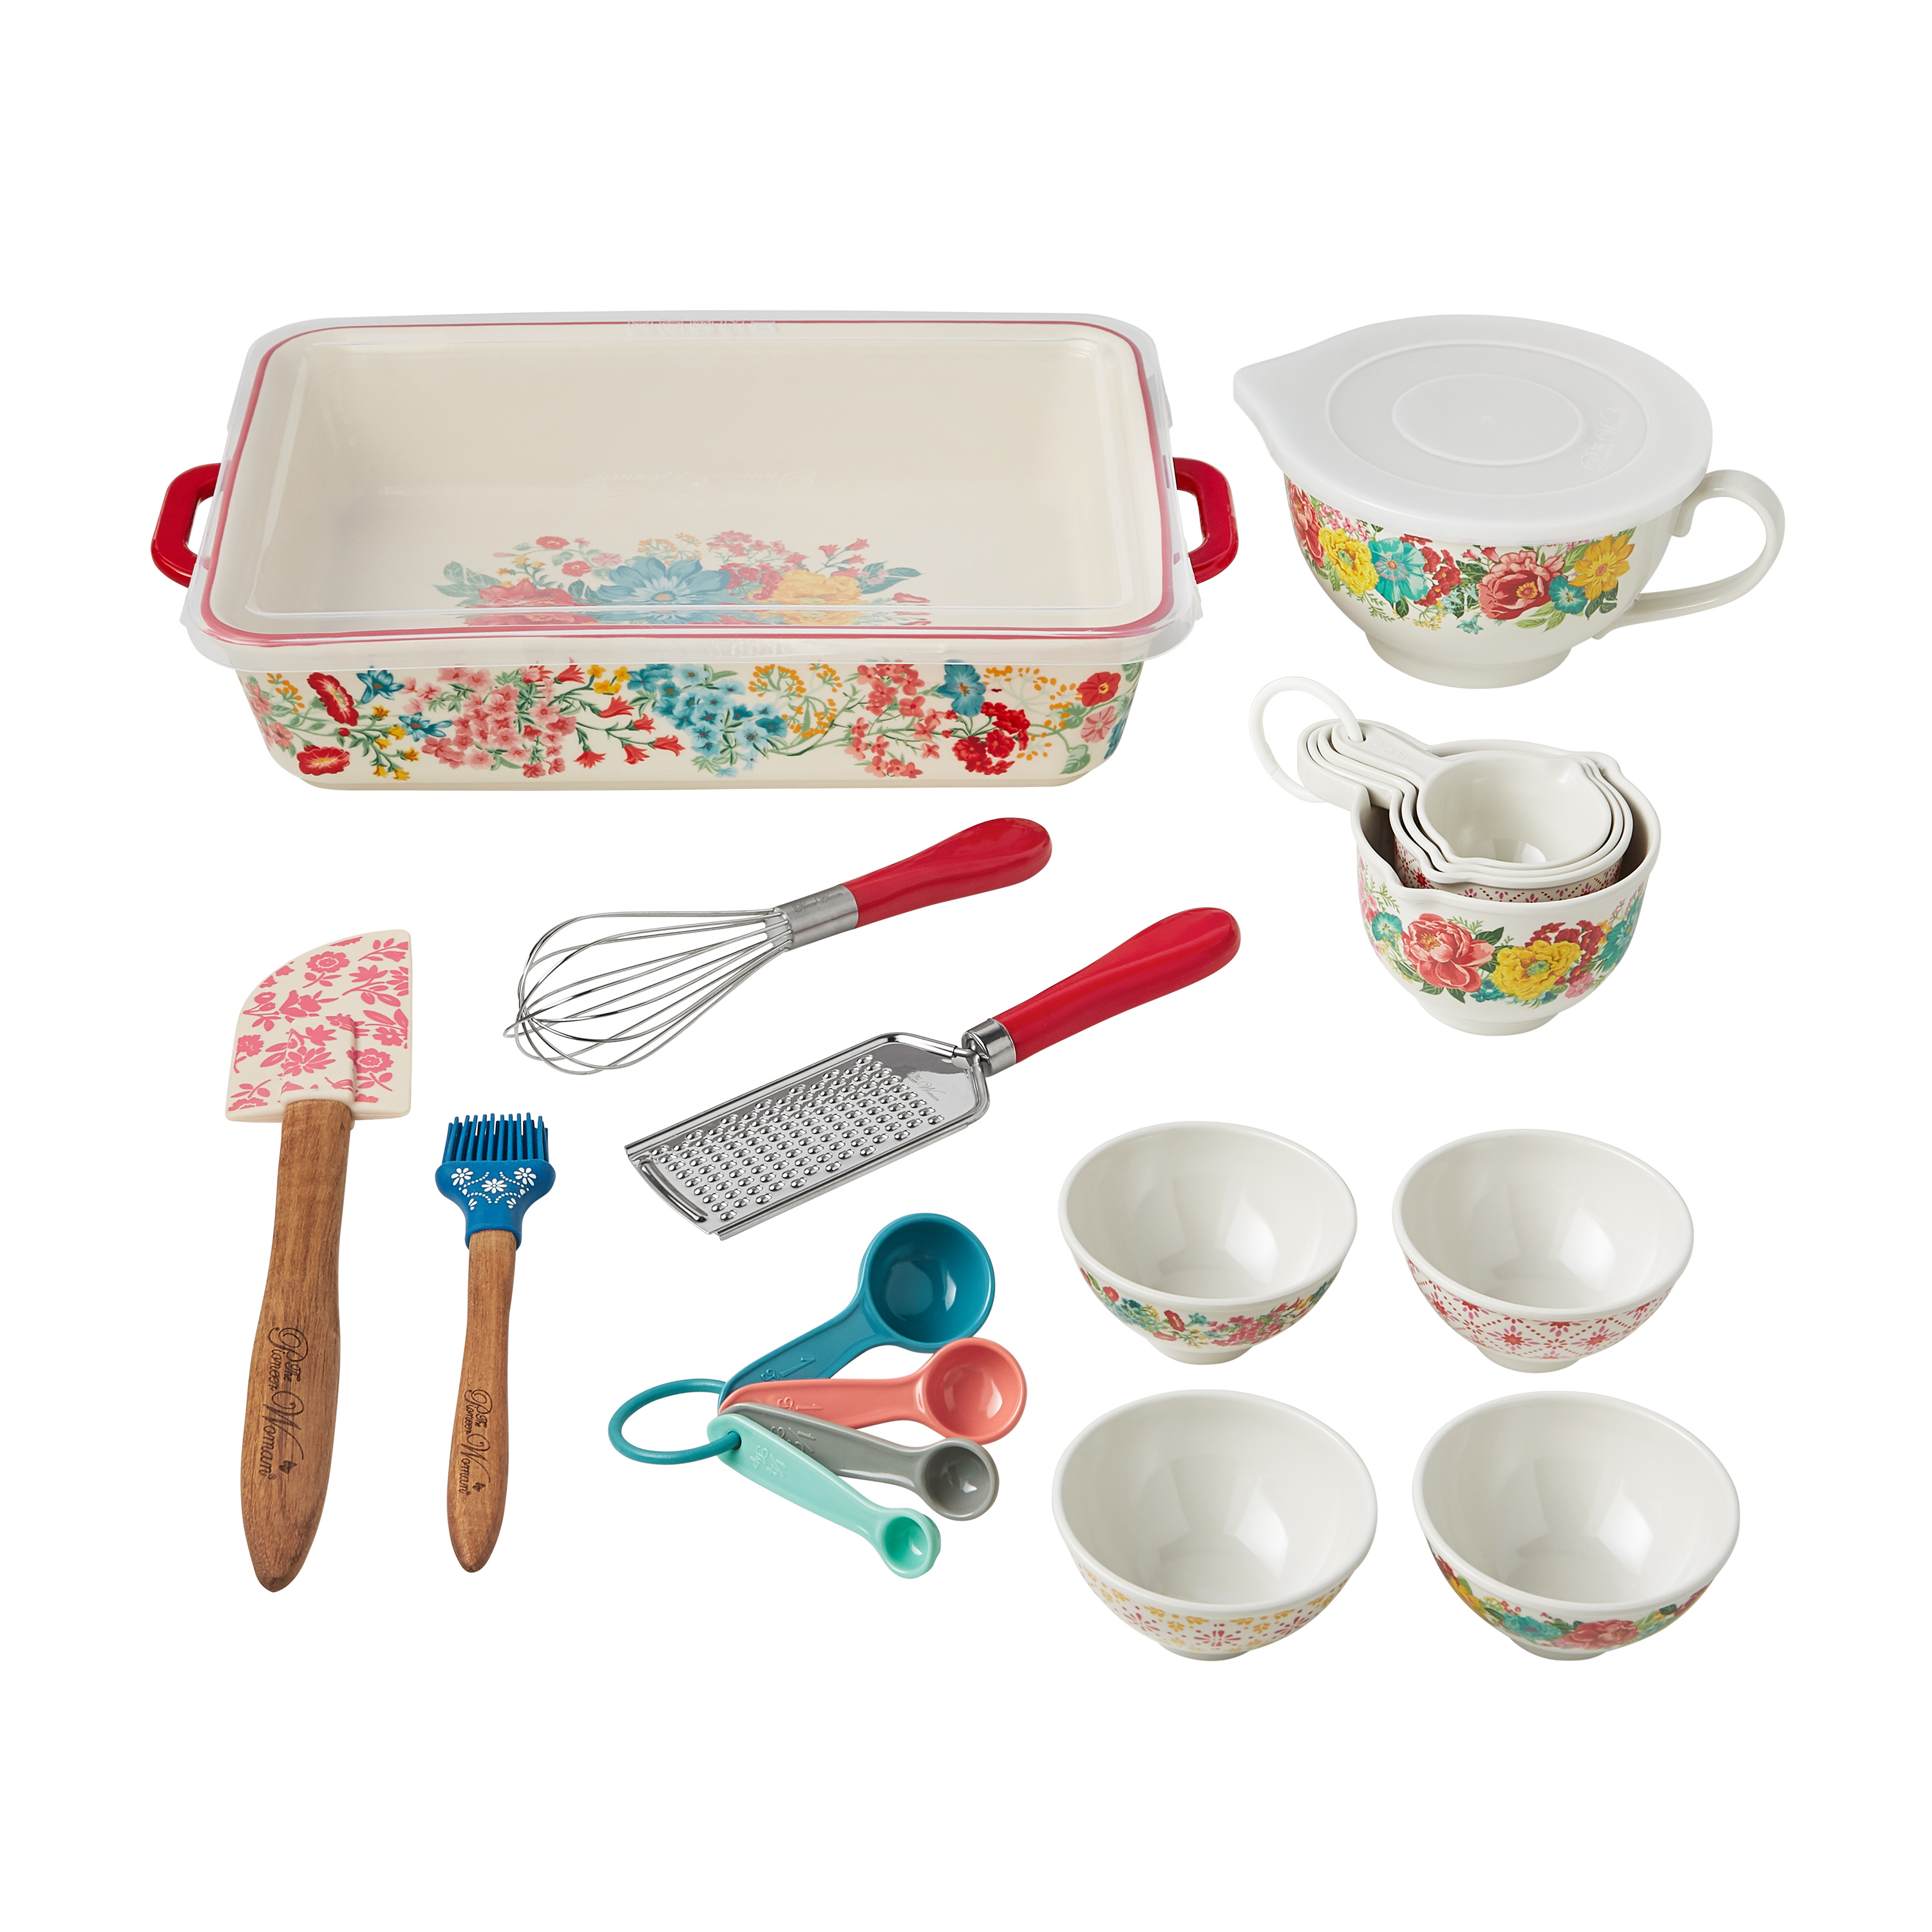 The Pioneer Woman Fancy Flourish 20-Piece Bake & Prep Set with Baking Dish & Measuring Cups - image 1 of 8